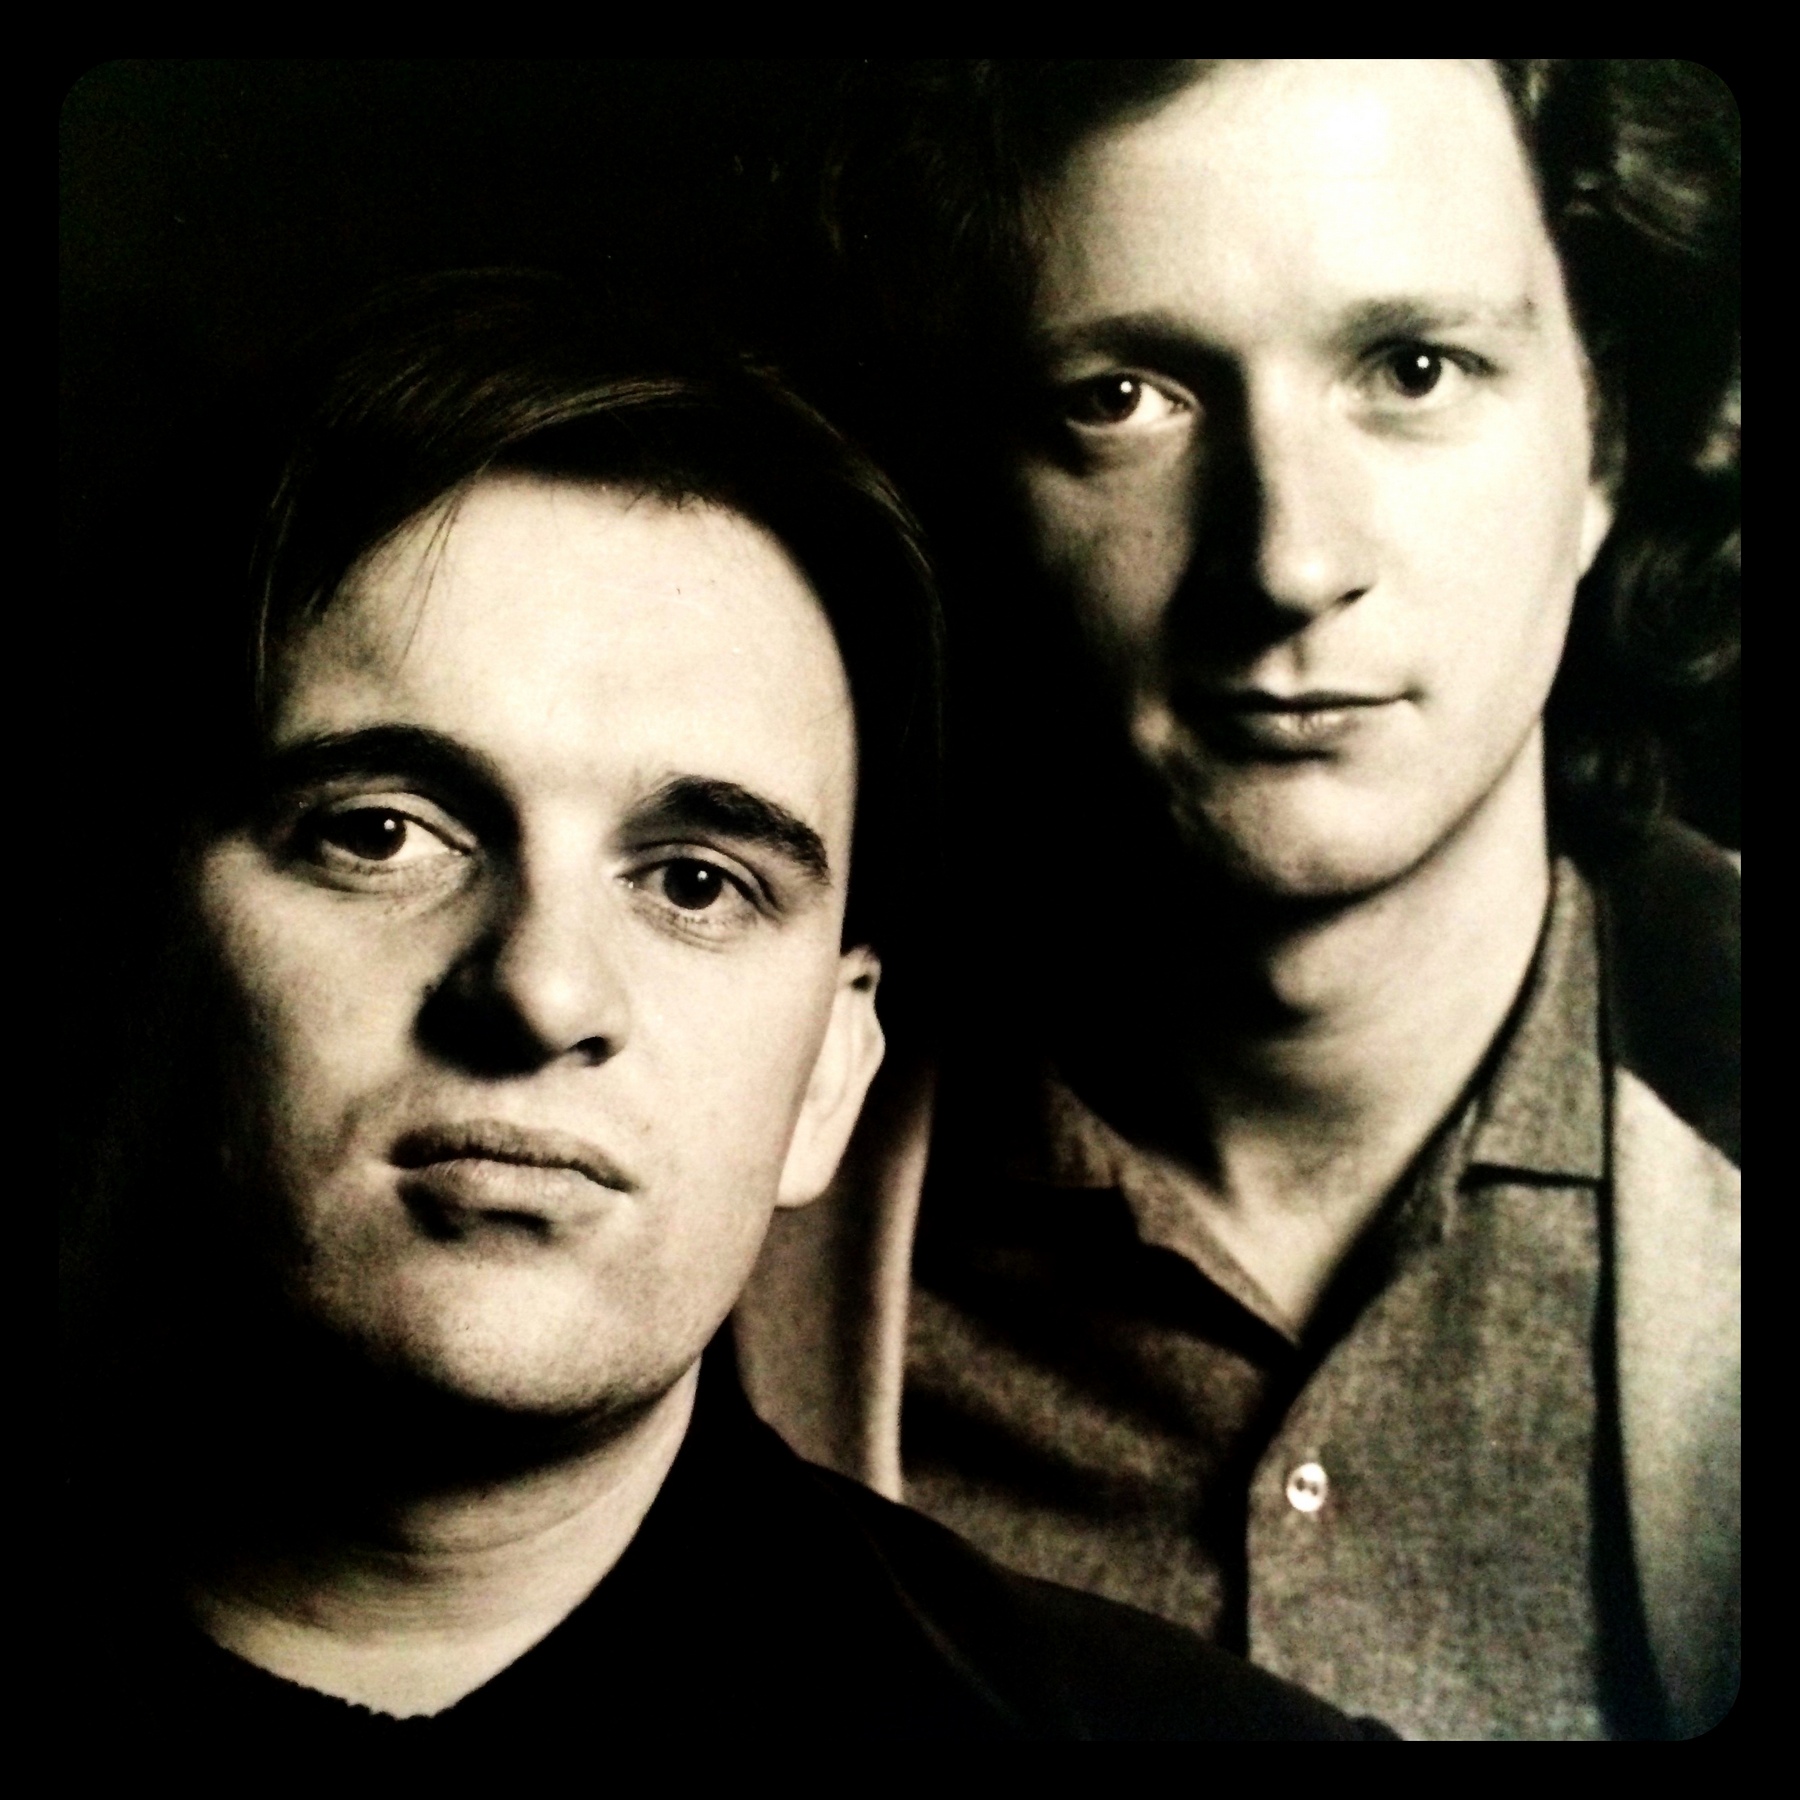 Difford and Tilbrook